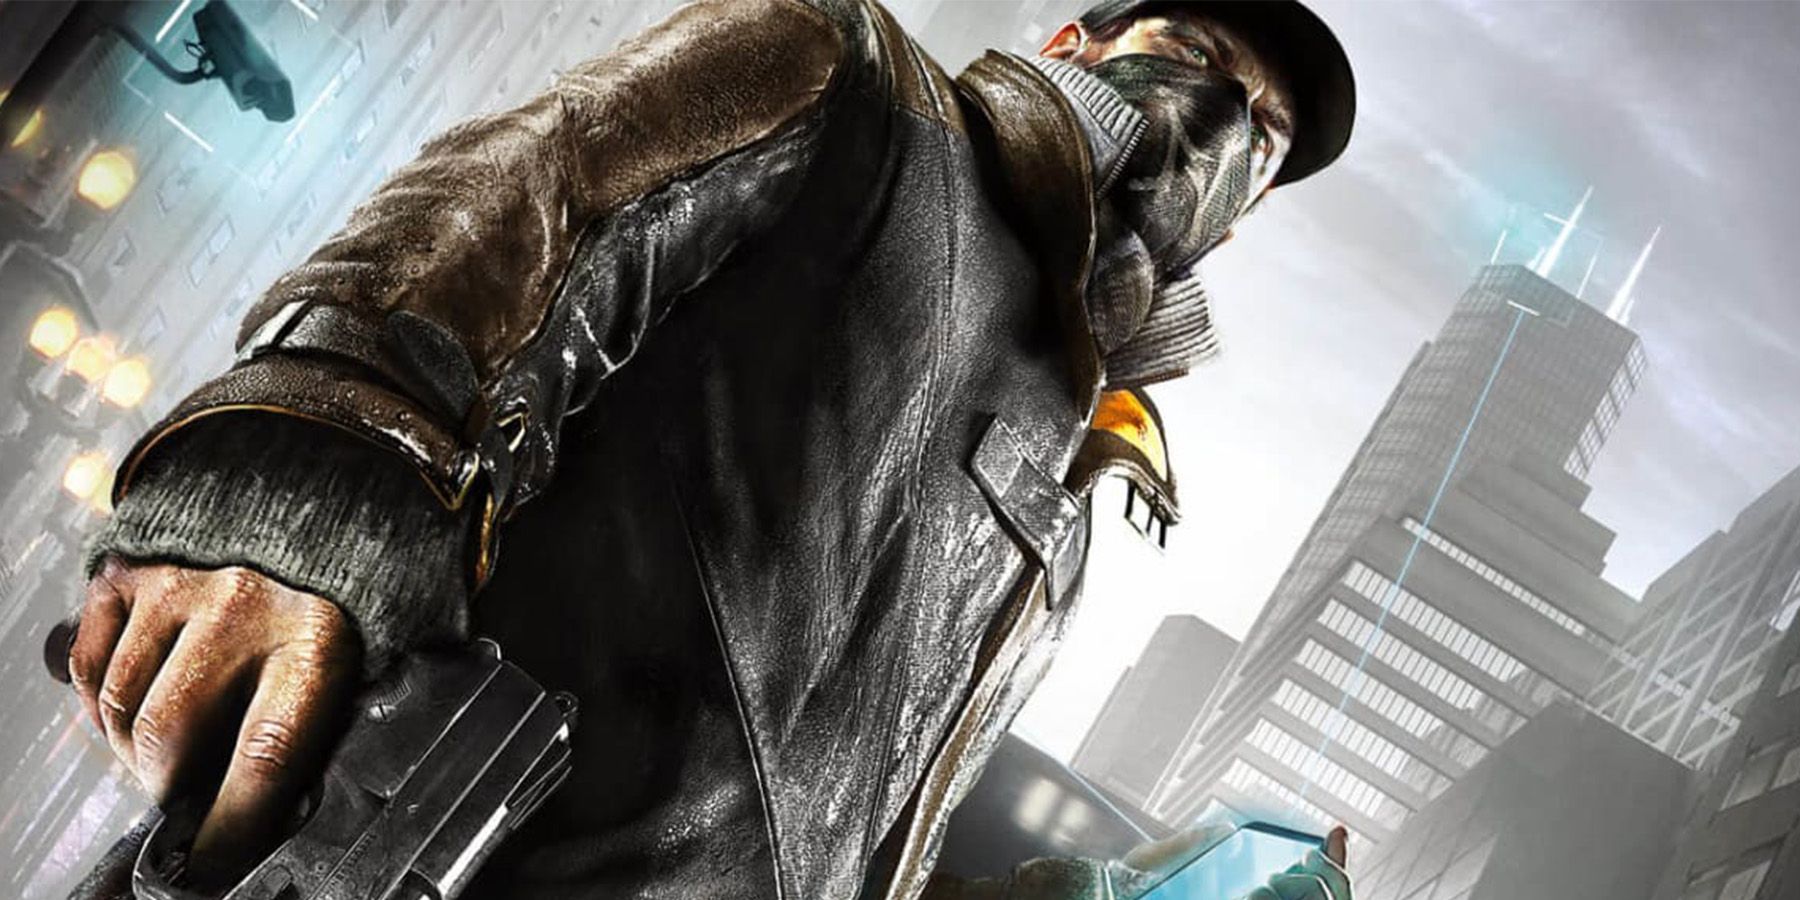 Watch Dogs 1